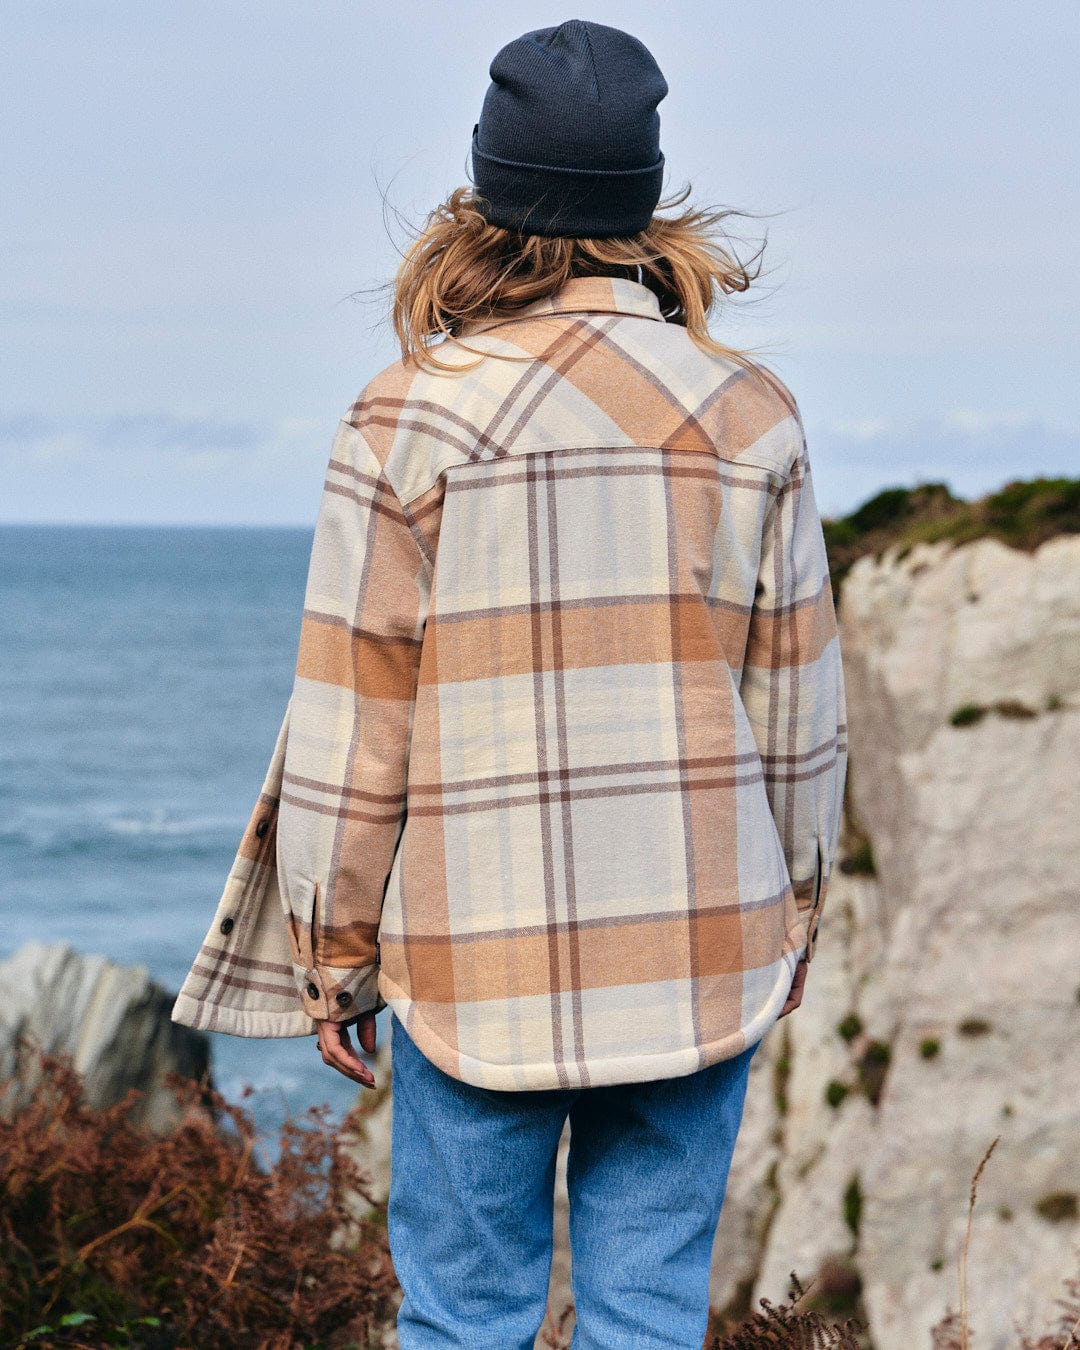 A woman wearing a Saltrock Stella - Womens Checked Borg Lined Shacket - Cream with buttoned cuffs, standing on a cliff overlooking the ocean.